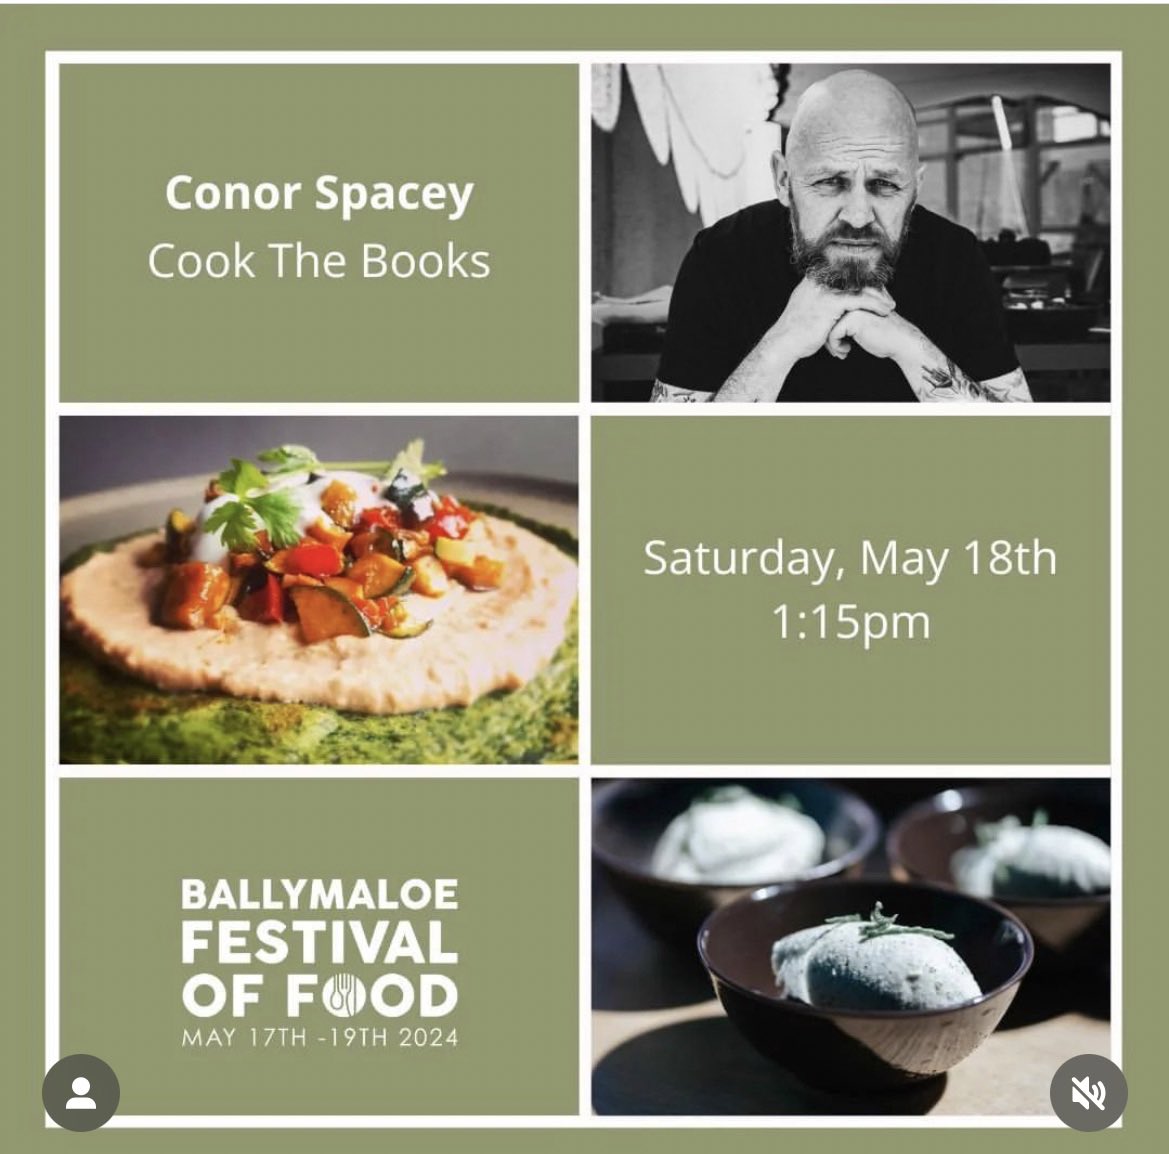 Great to see so many chefs and #foodwriters taking part in @Ballymaloe’s Festival of Food in #Cork later this month; @thecupcakebloke, @rorysfood @Spaceychef, @ashy_moore, @lil_portie, @marky01, @bahaydub, @ThatAliceCooks, @rachelallen1, @sarahdebrun, @Martyfishy1 and many more✨